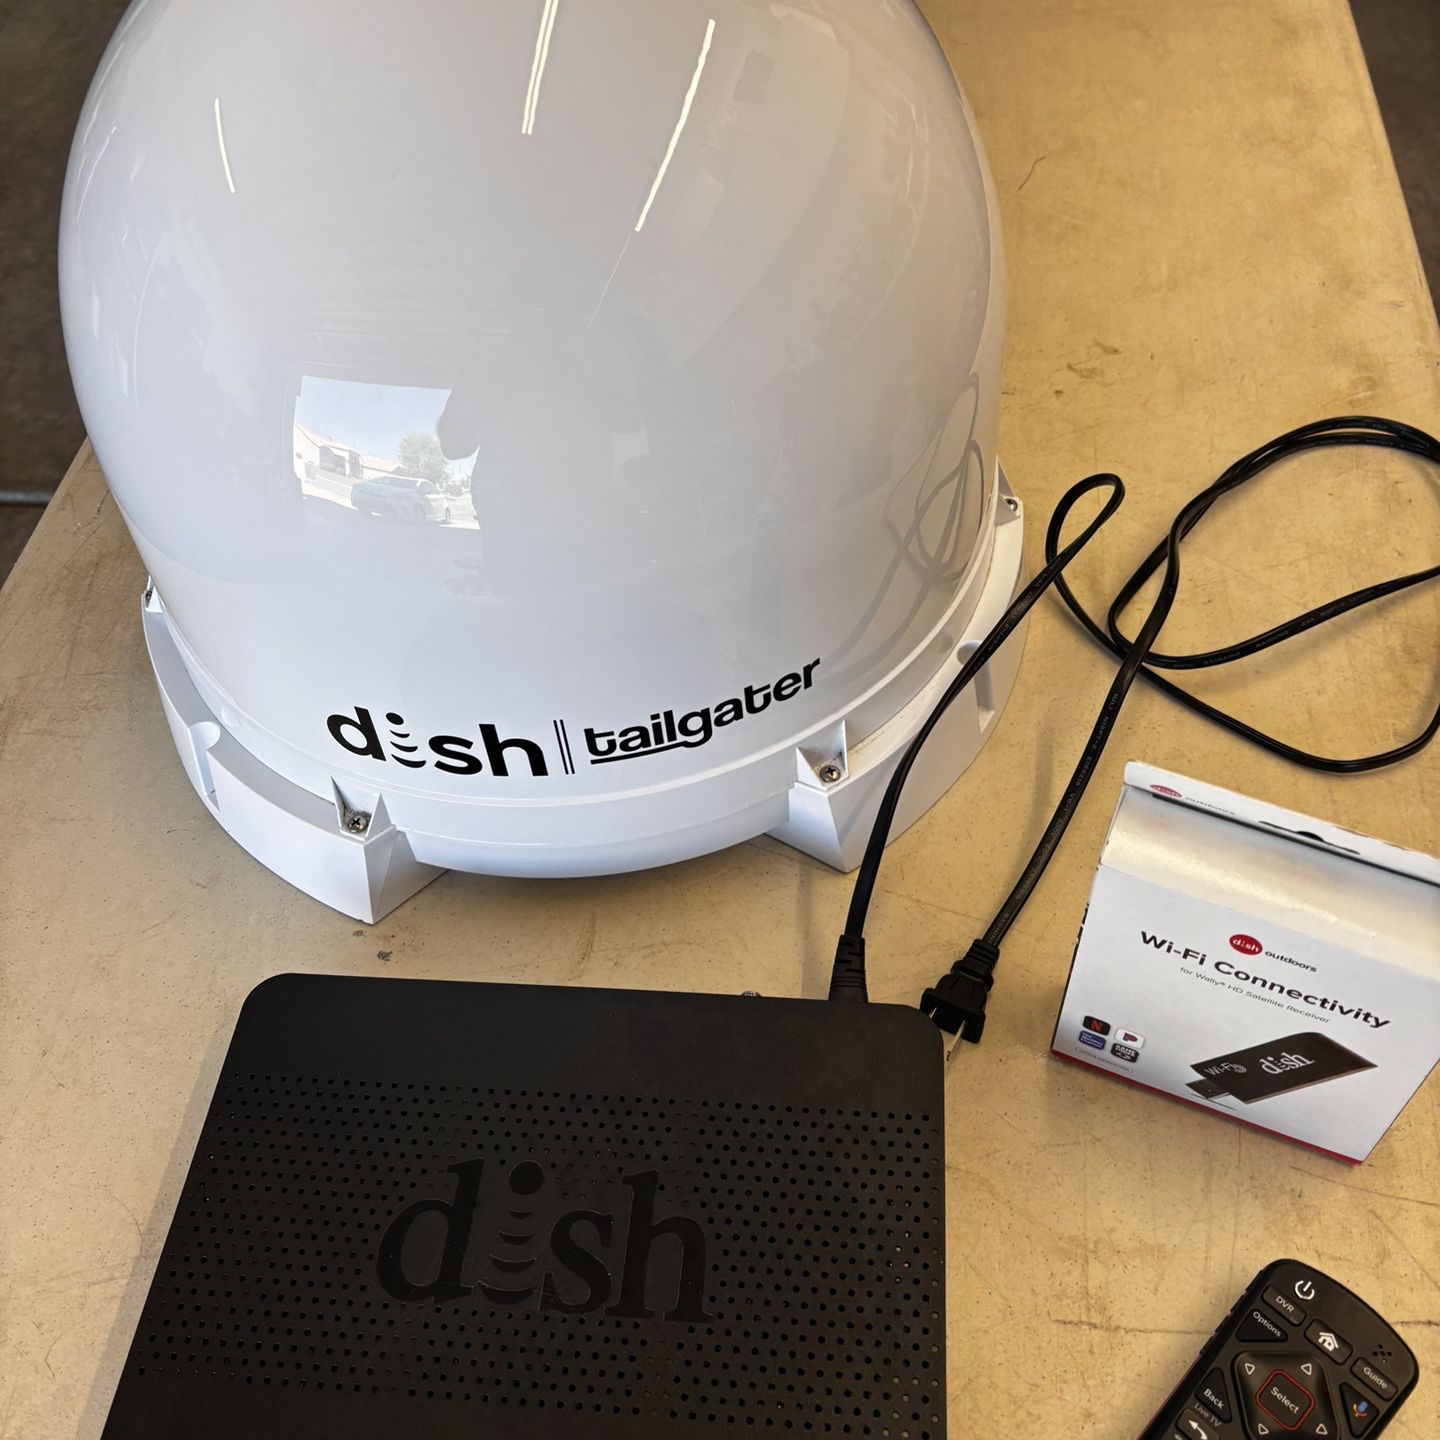 Dish RV Tailgater Satellite receiver And Wally Hopper, Controller, WiFi Connectivity